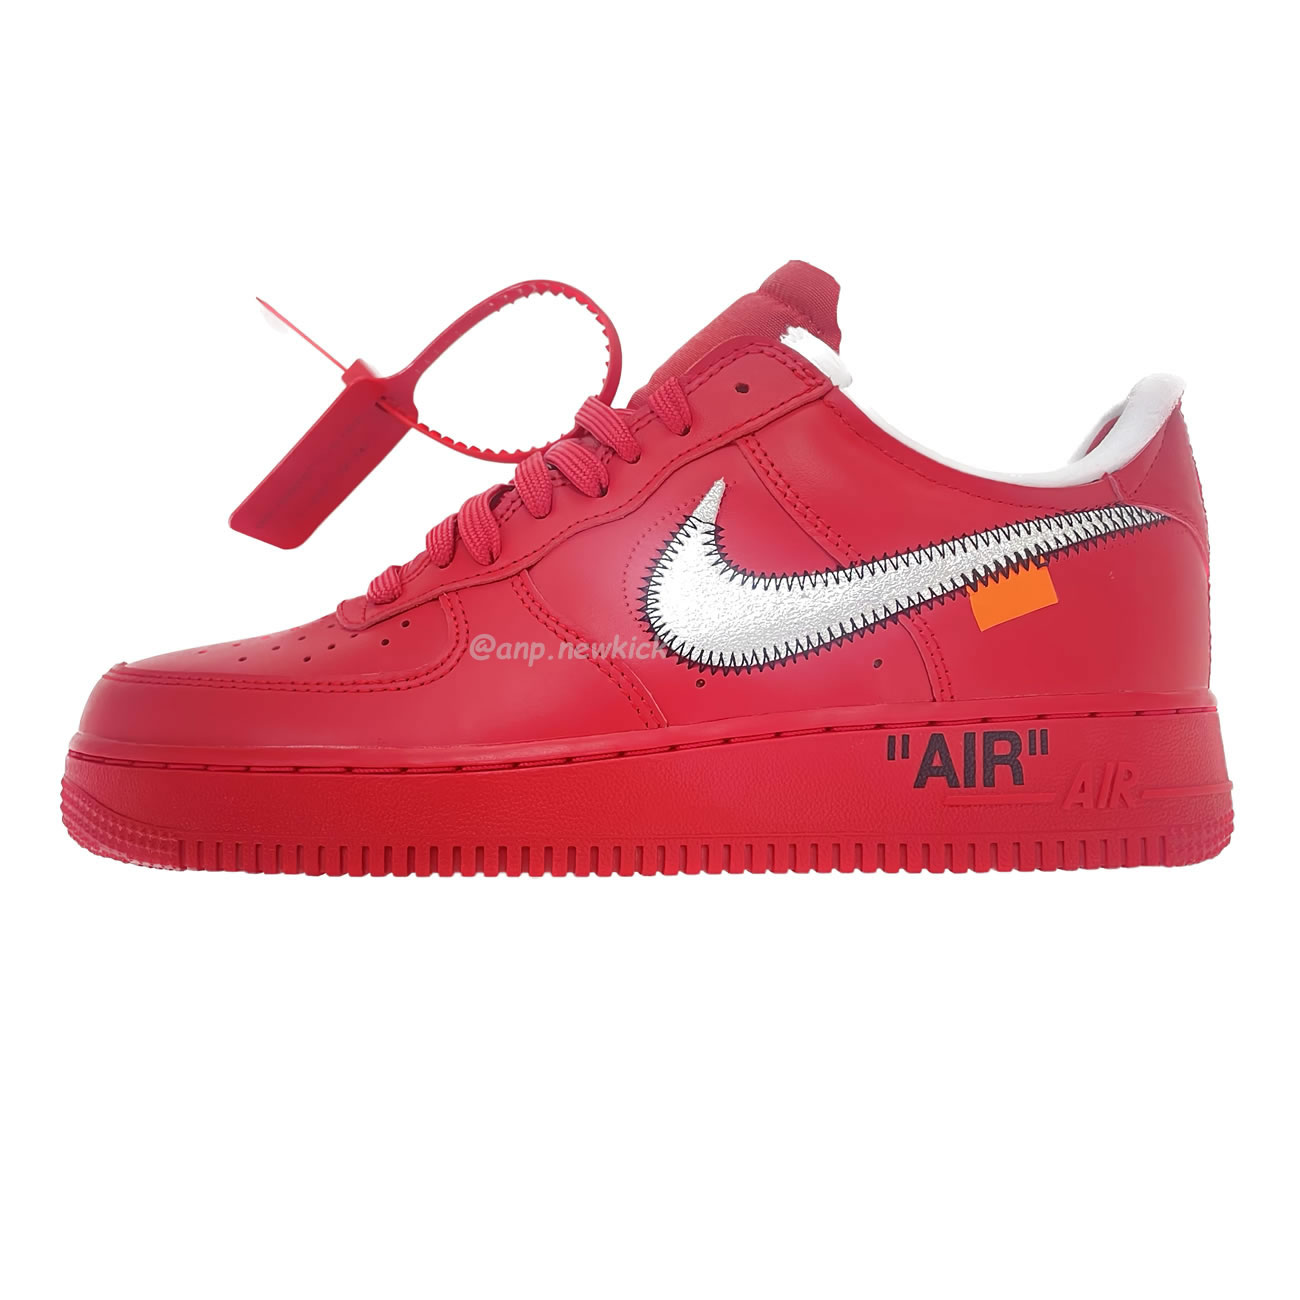 Nike Air Force 1 Low Off White Red Ao4297 600 (1) - newkick.org